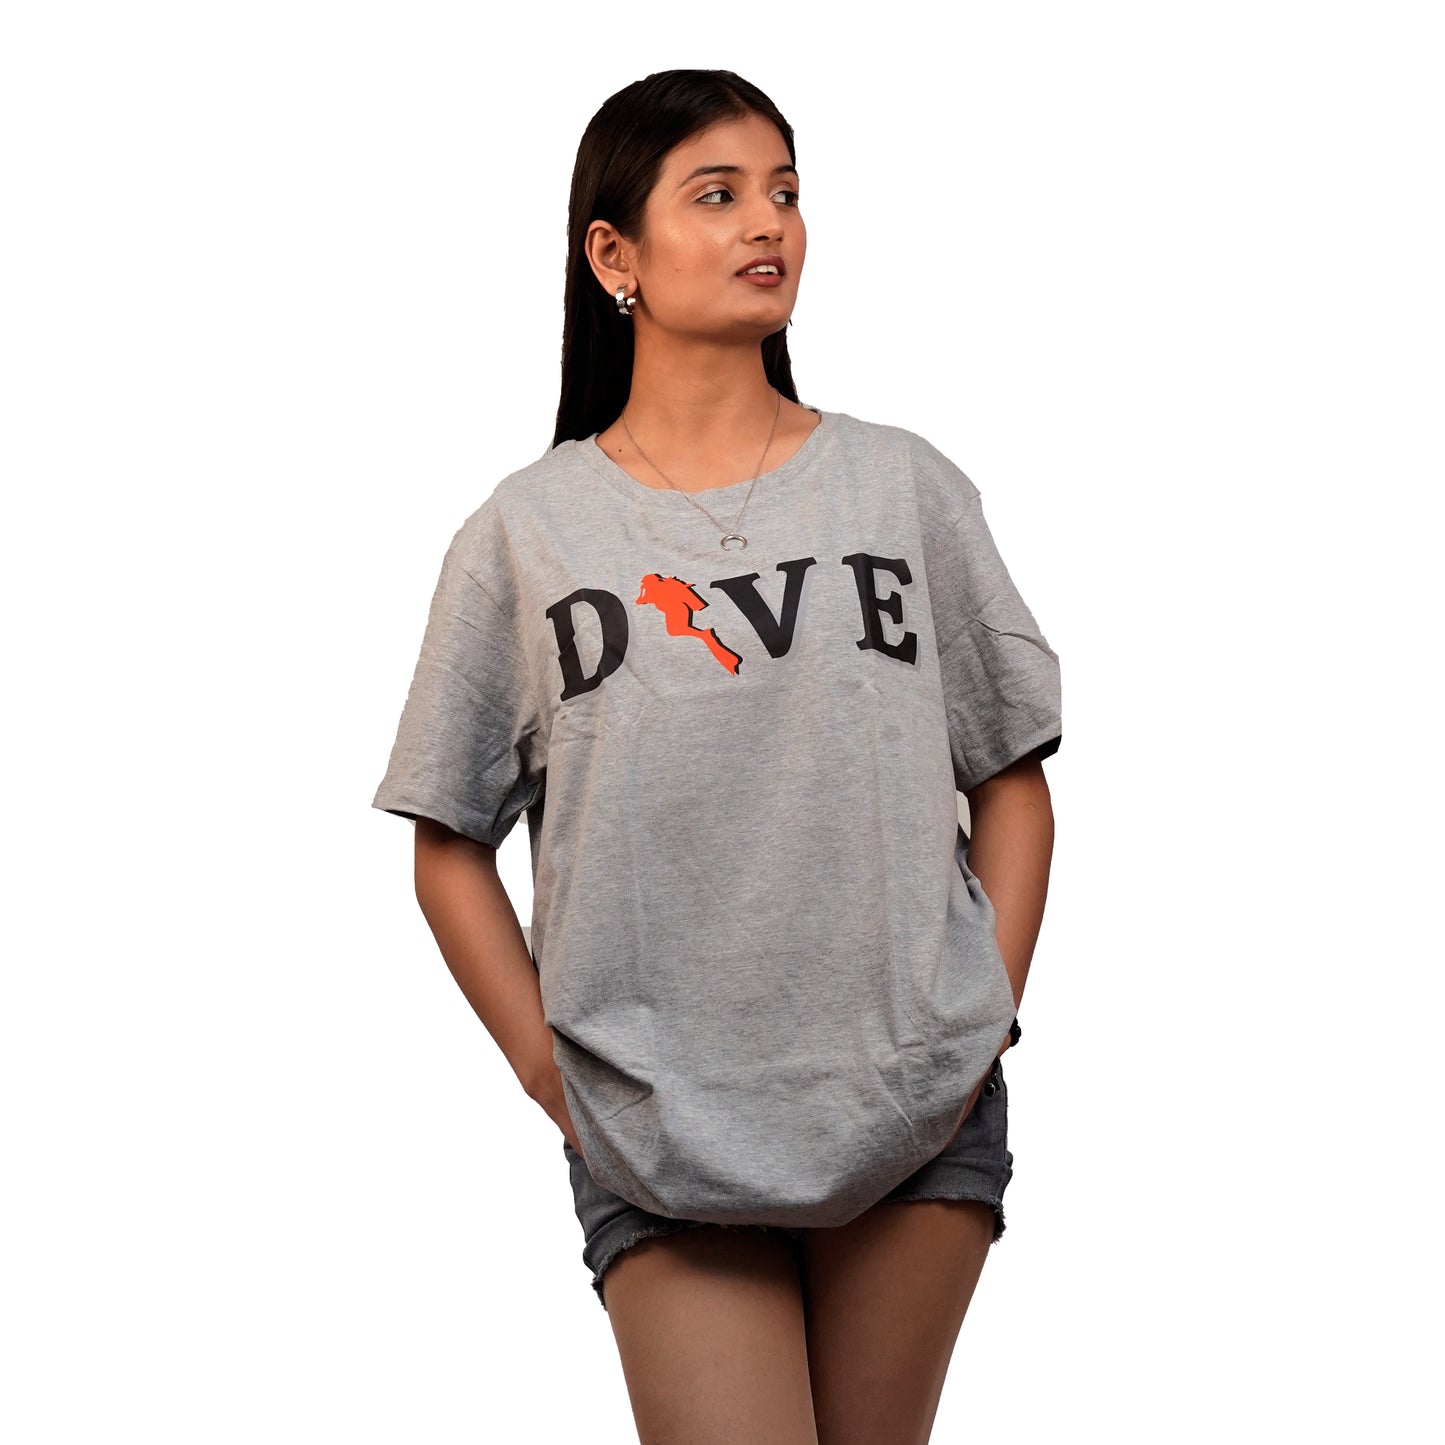 Dive Printed T-Shirt In Grey Color For Women